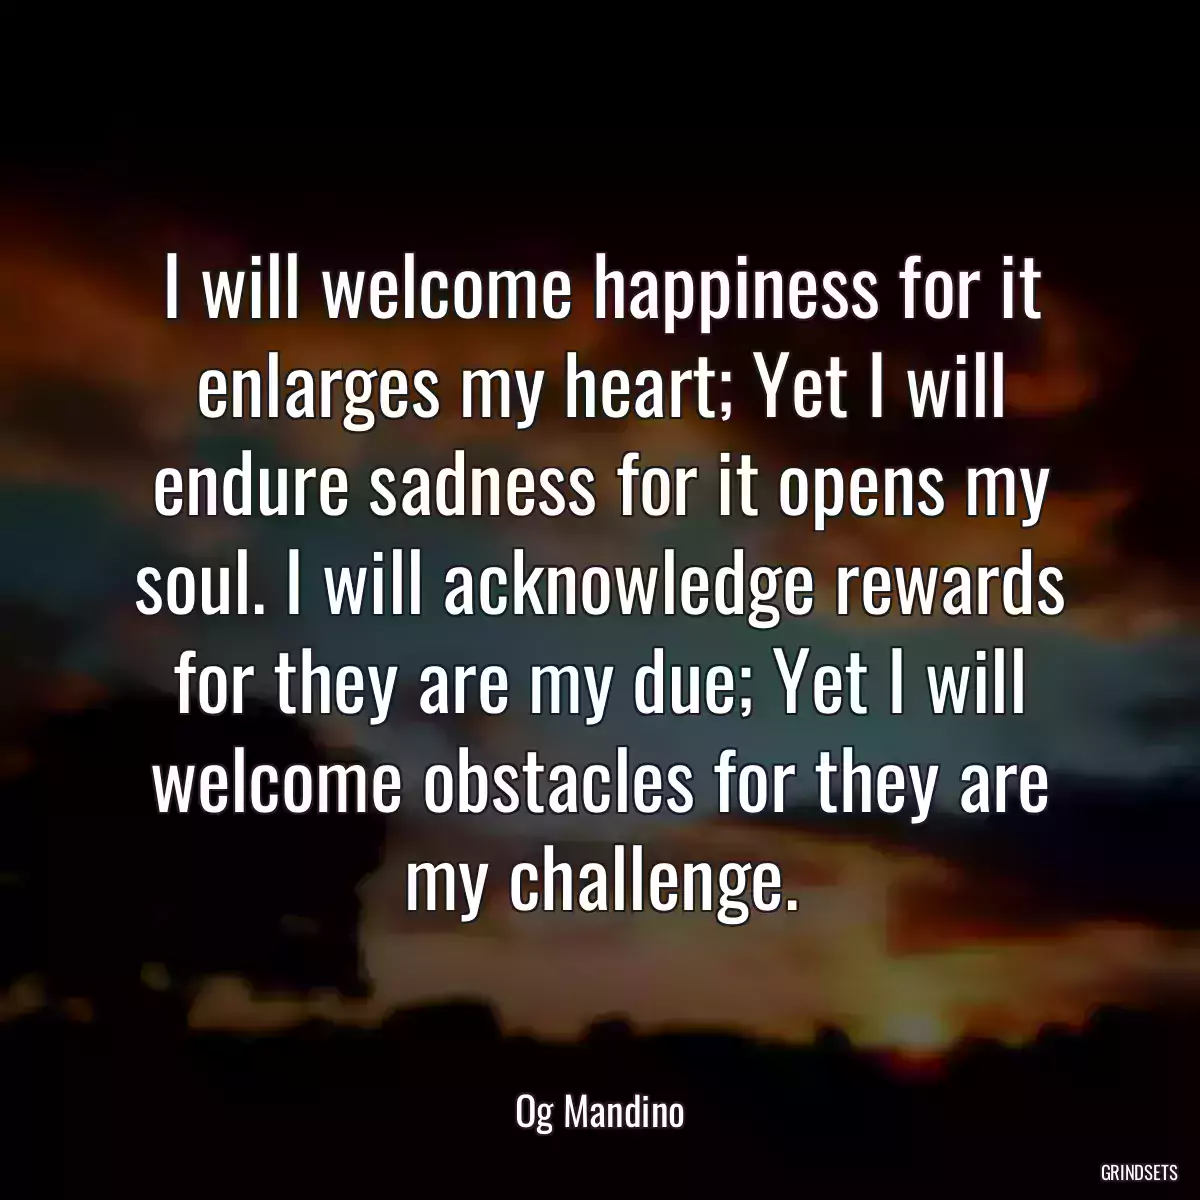 I will welcome happiness for it enlarges my heart; Yet I will endure sadness for it opens my soul. I will acknowledge rewards for they are my due; Yet I will welcome obstacles for they are my challenge.